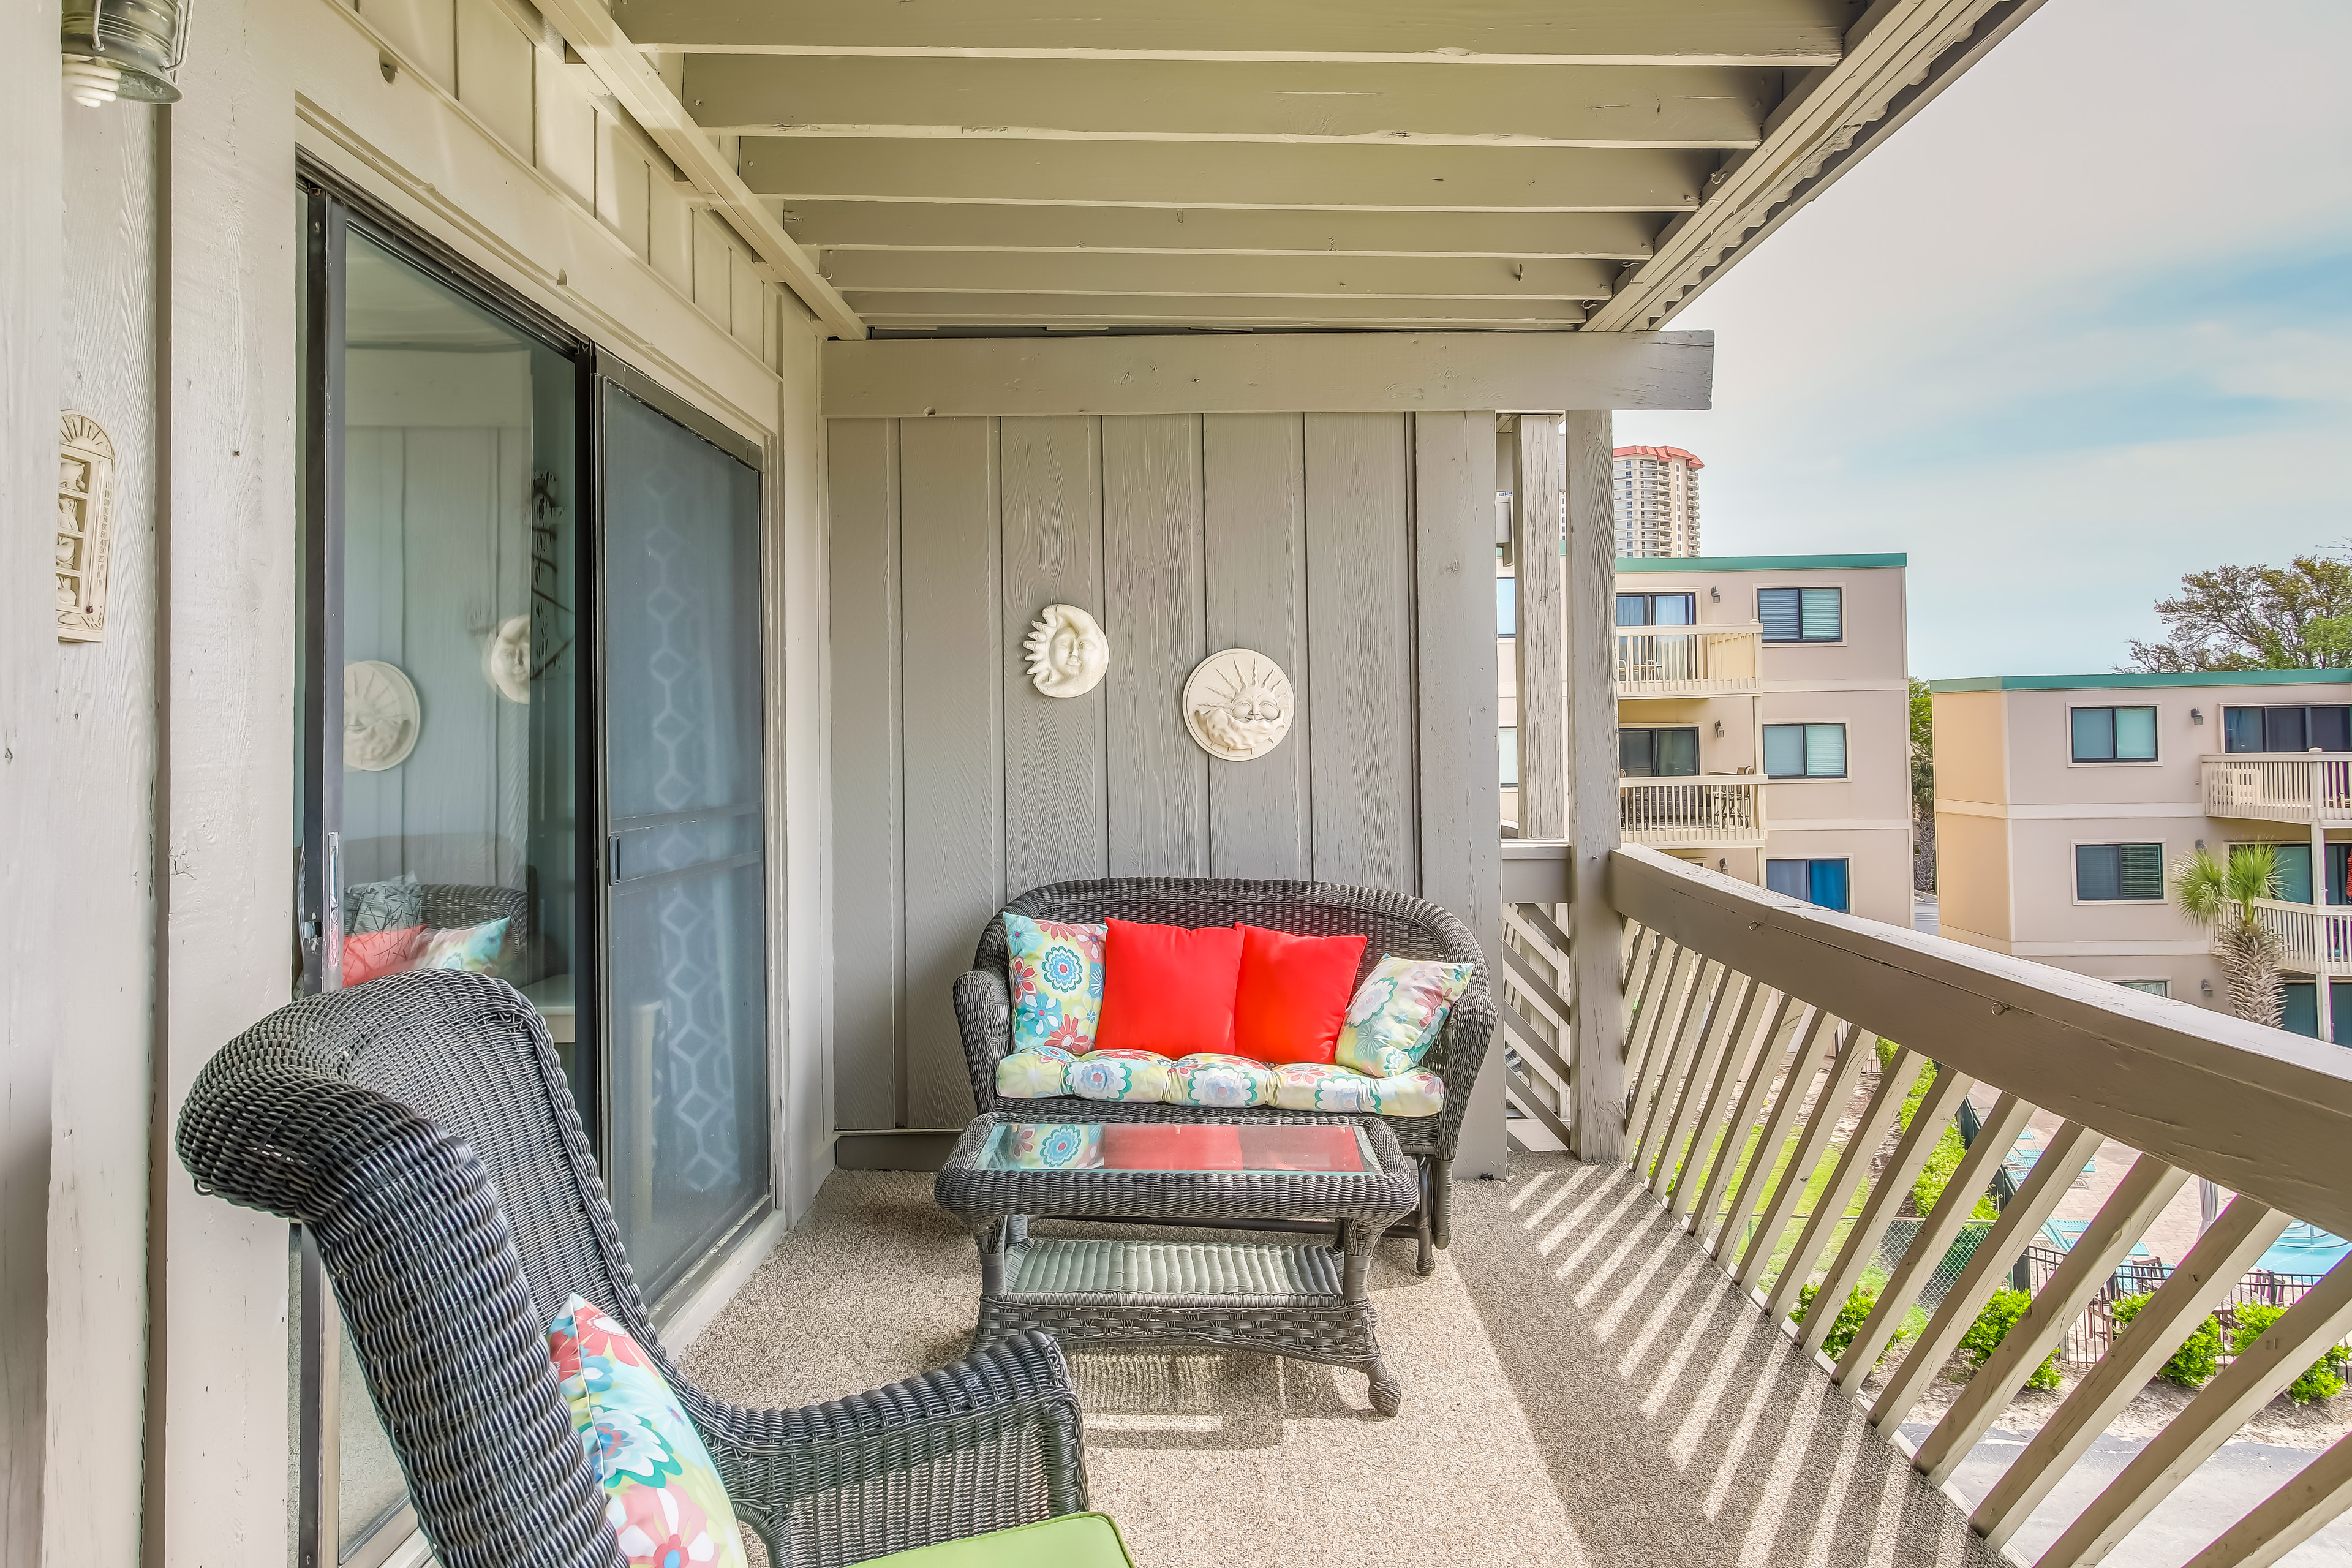 Property Image 2 - Charming Myrtle Beach Condo: Pool & Beach Access!